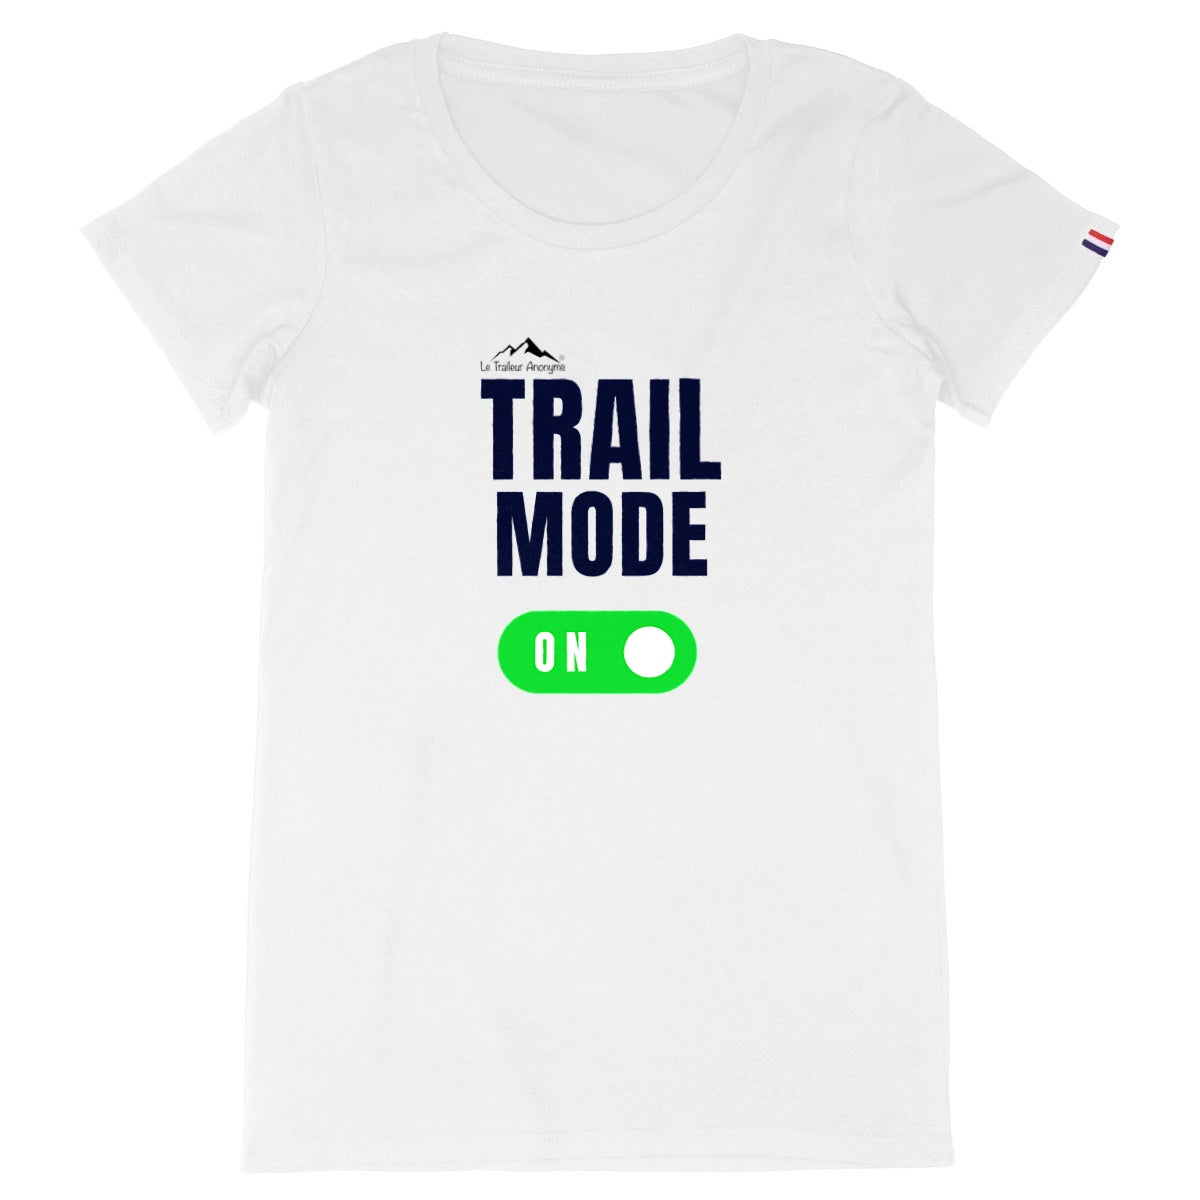 T-Shirt Coton Bio- 🇫🇷Made in France🇫🇷 - Femme - Collection "Trail Mode" (1530) - Le Traileur Anonyme